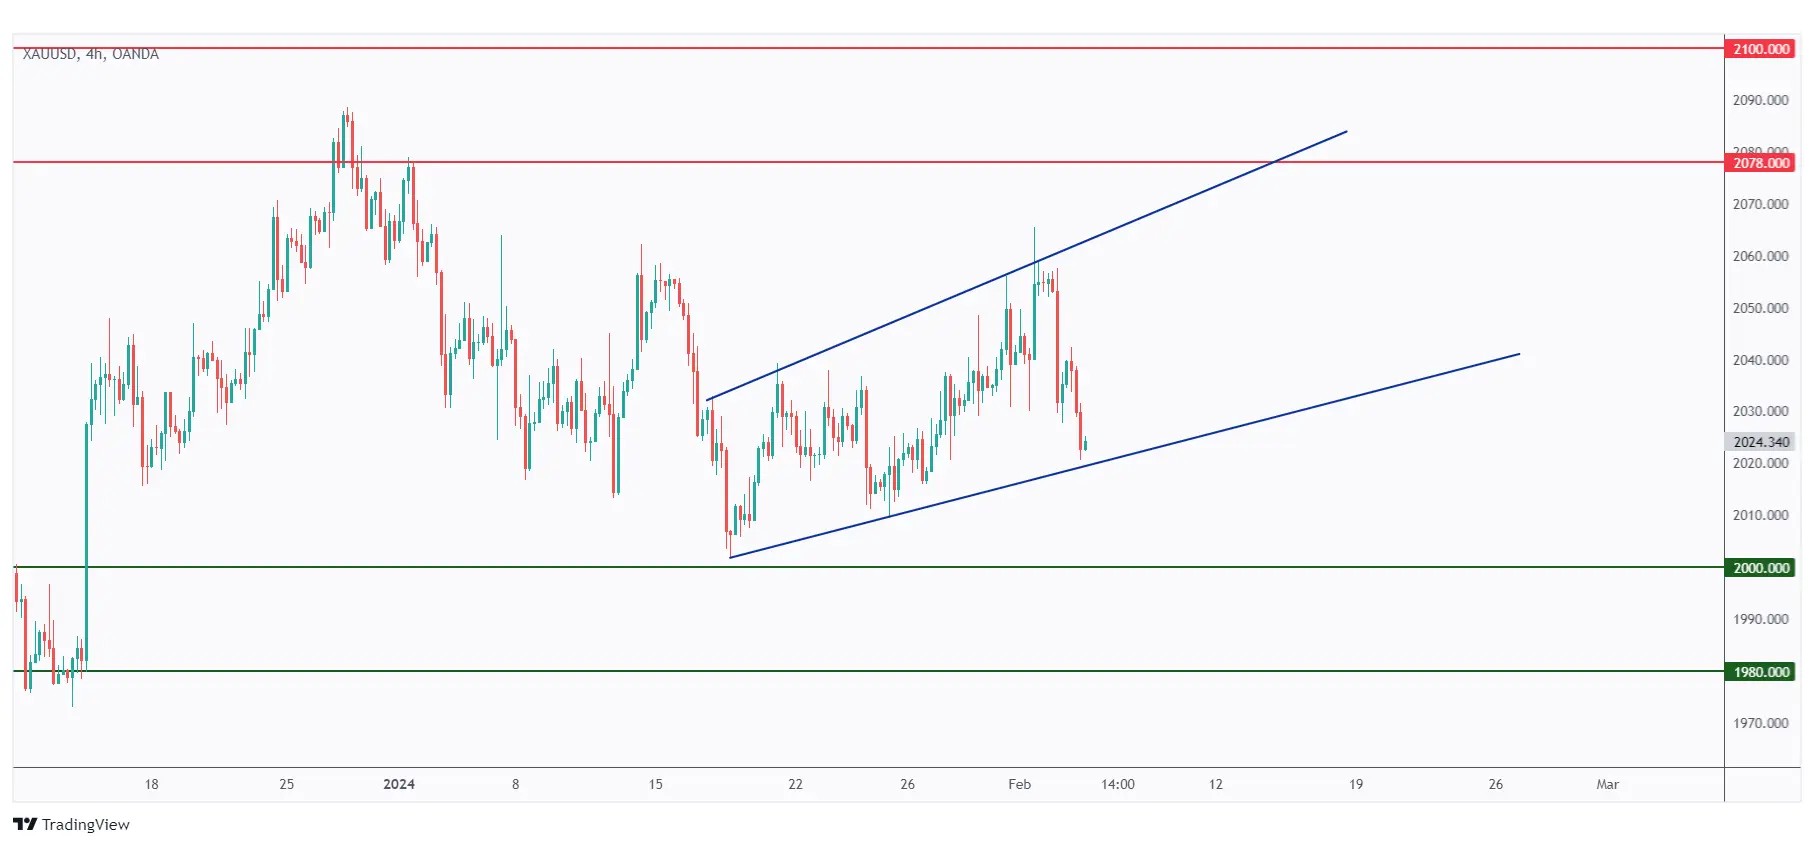 Gold 4h chart overall bullish trading inside the rising channel an it is currently sitting around the lower bound of it.